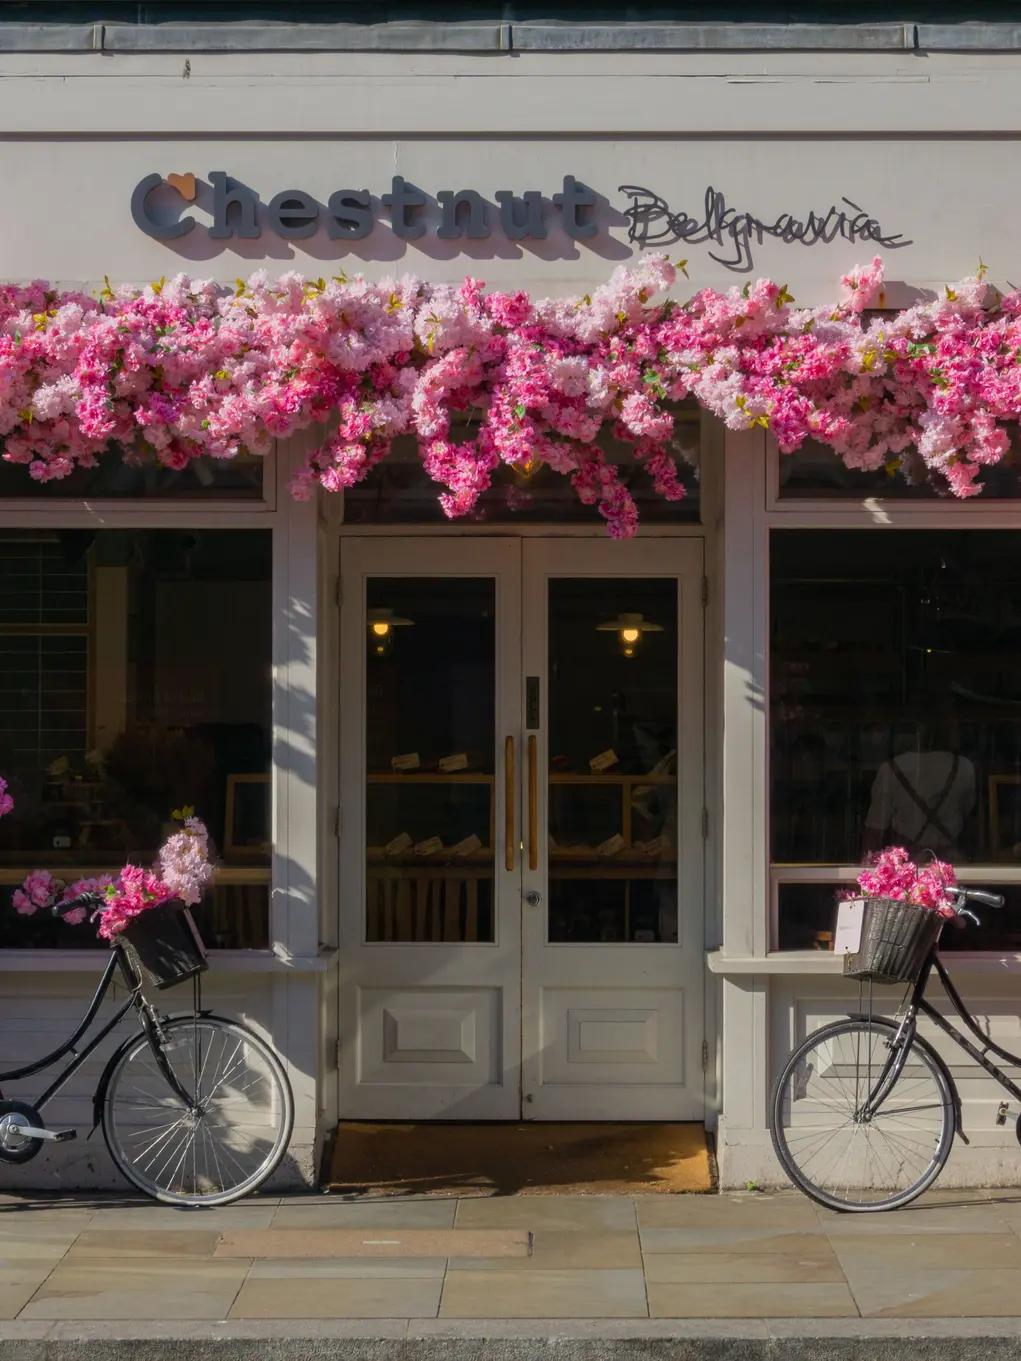 Outside of Chestnut Bakery surrounded with pink flowers